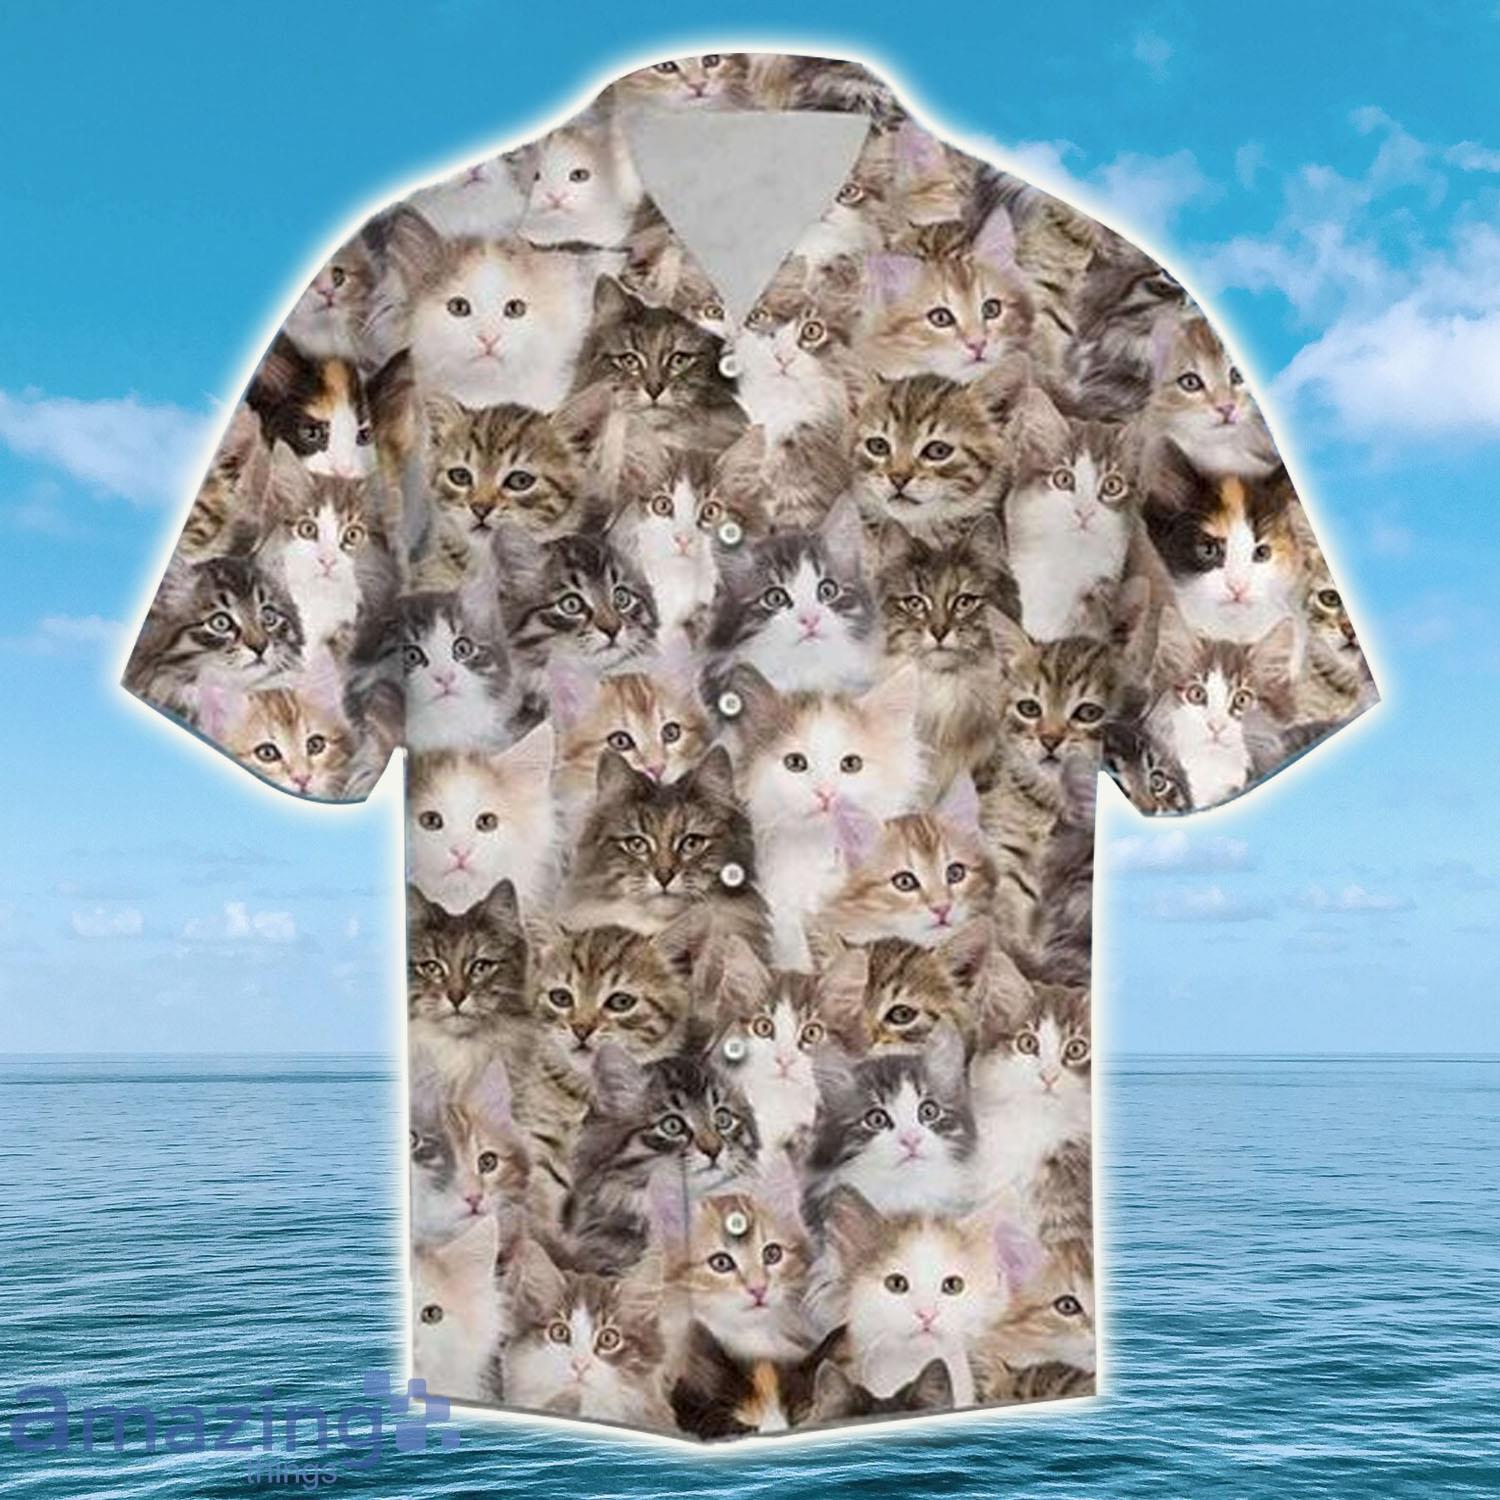 Norwegian Forest Cat Awesome, Cat Hawaiian Shirt - Norwegian Forest Cat Awesome, Cat Hawaiian Shirt